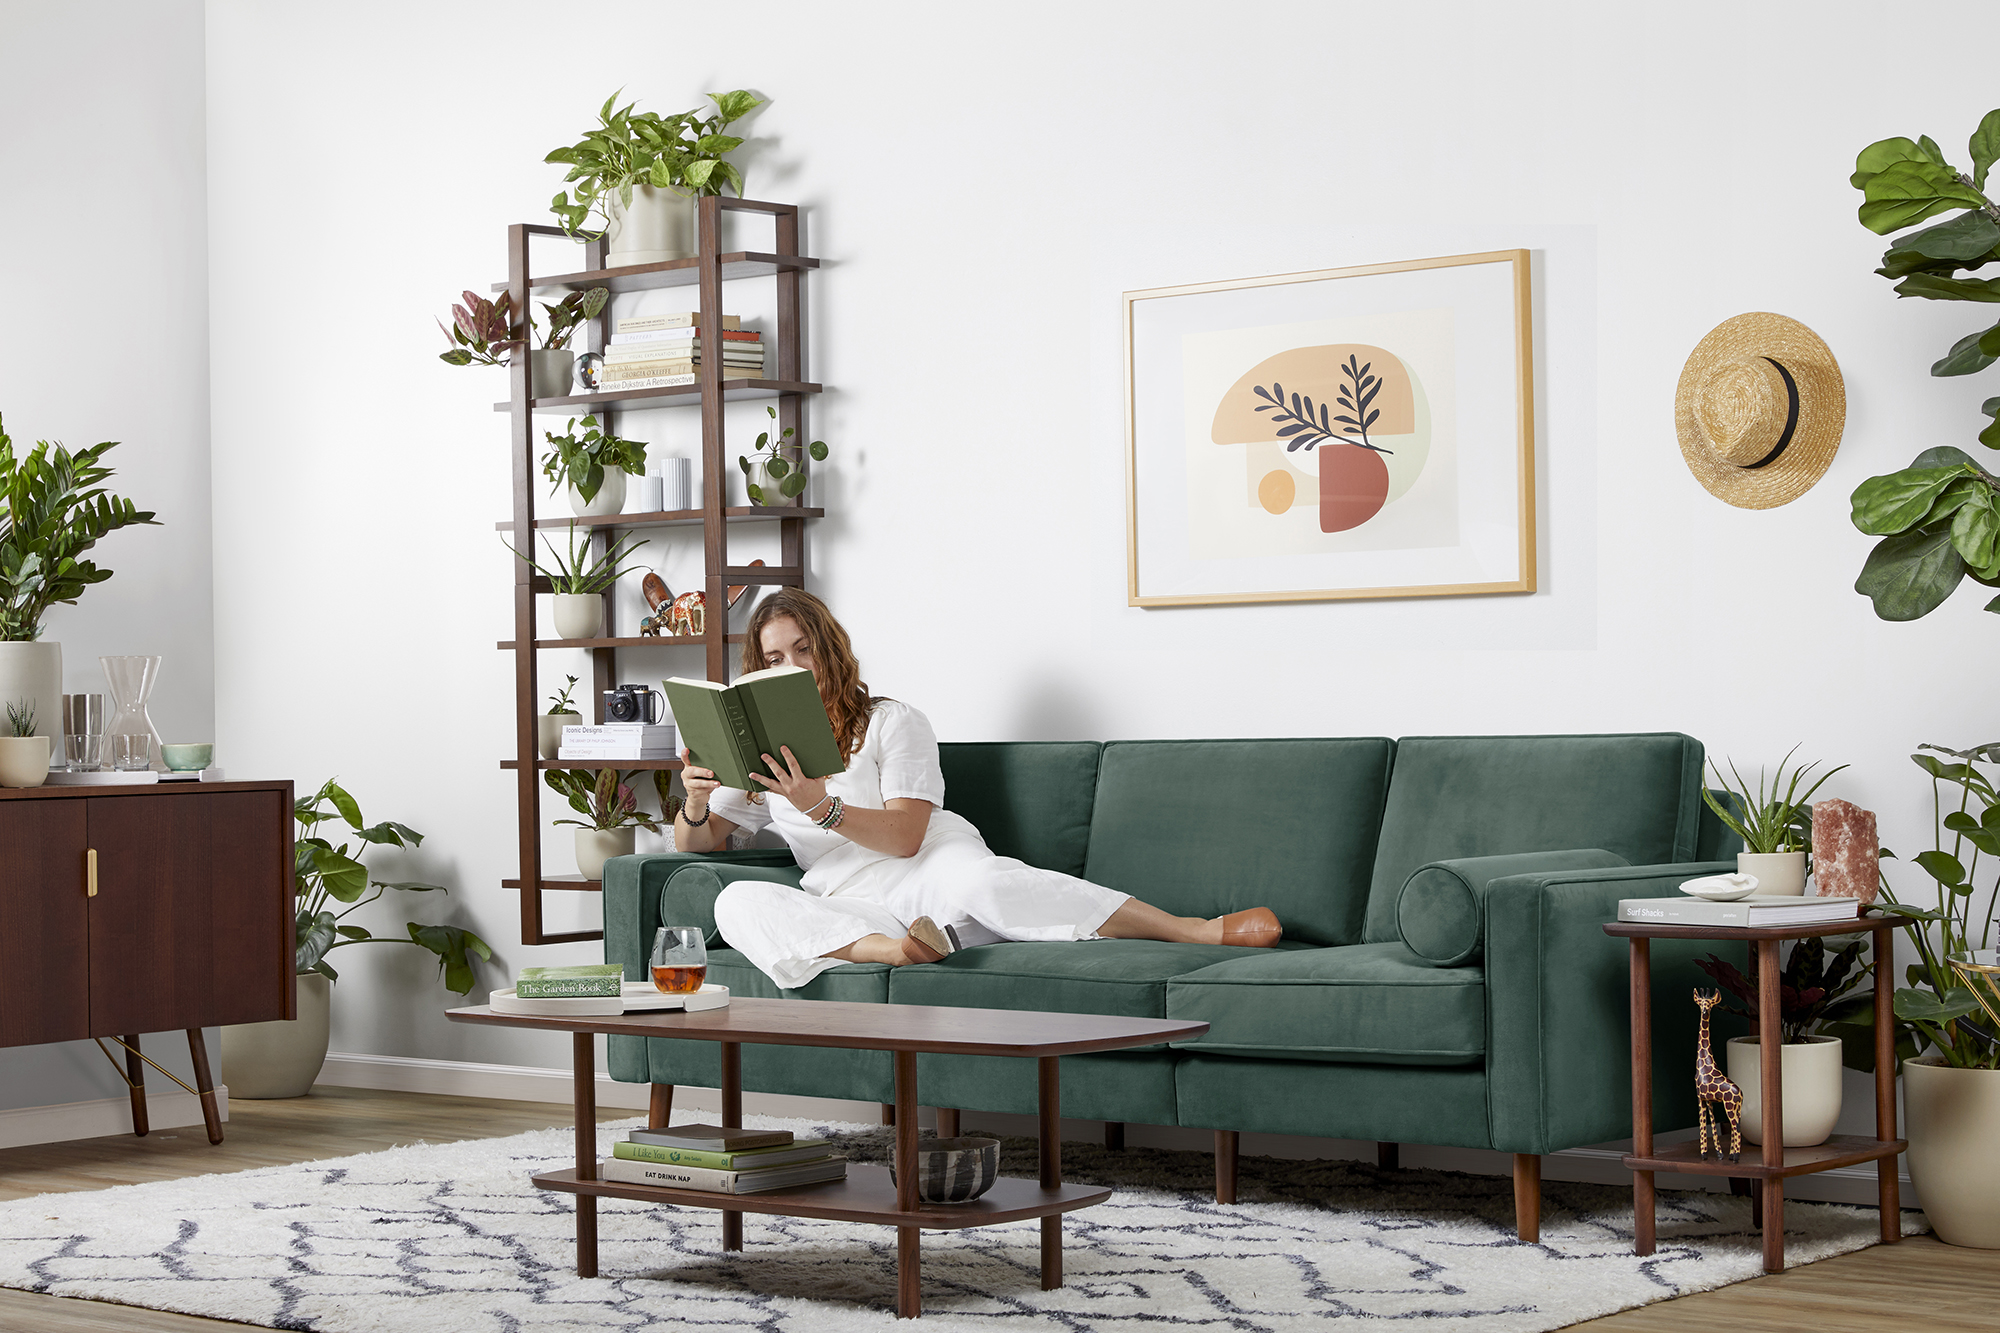 A woman reading a green book on a green couch in her living room